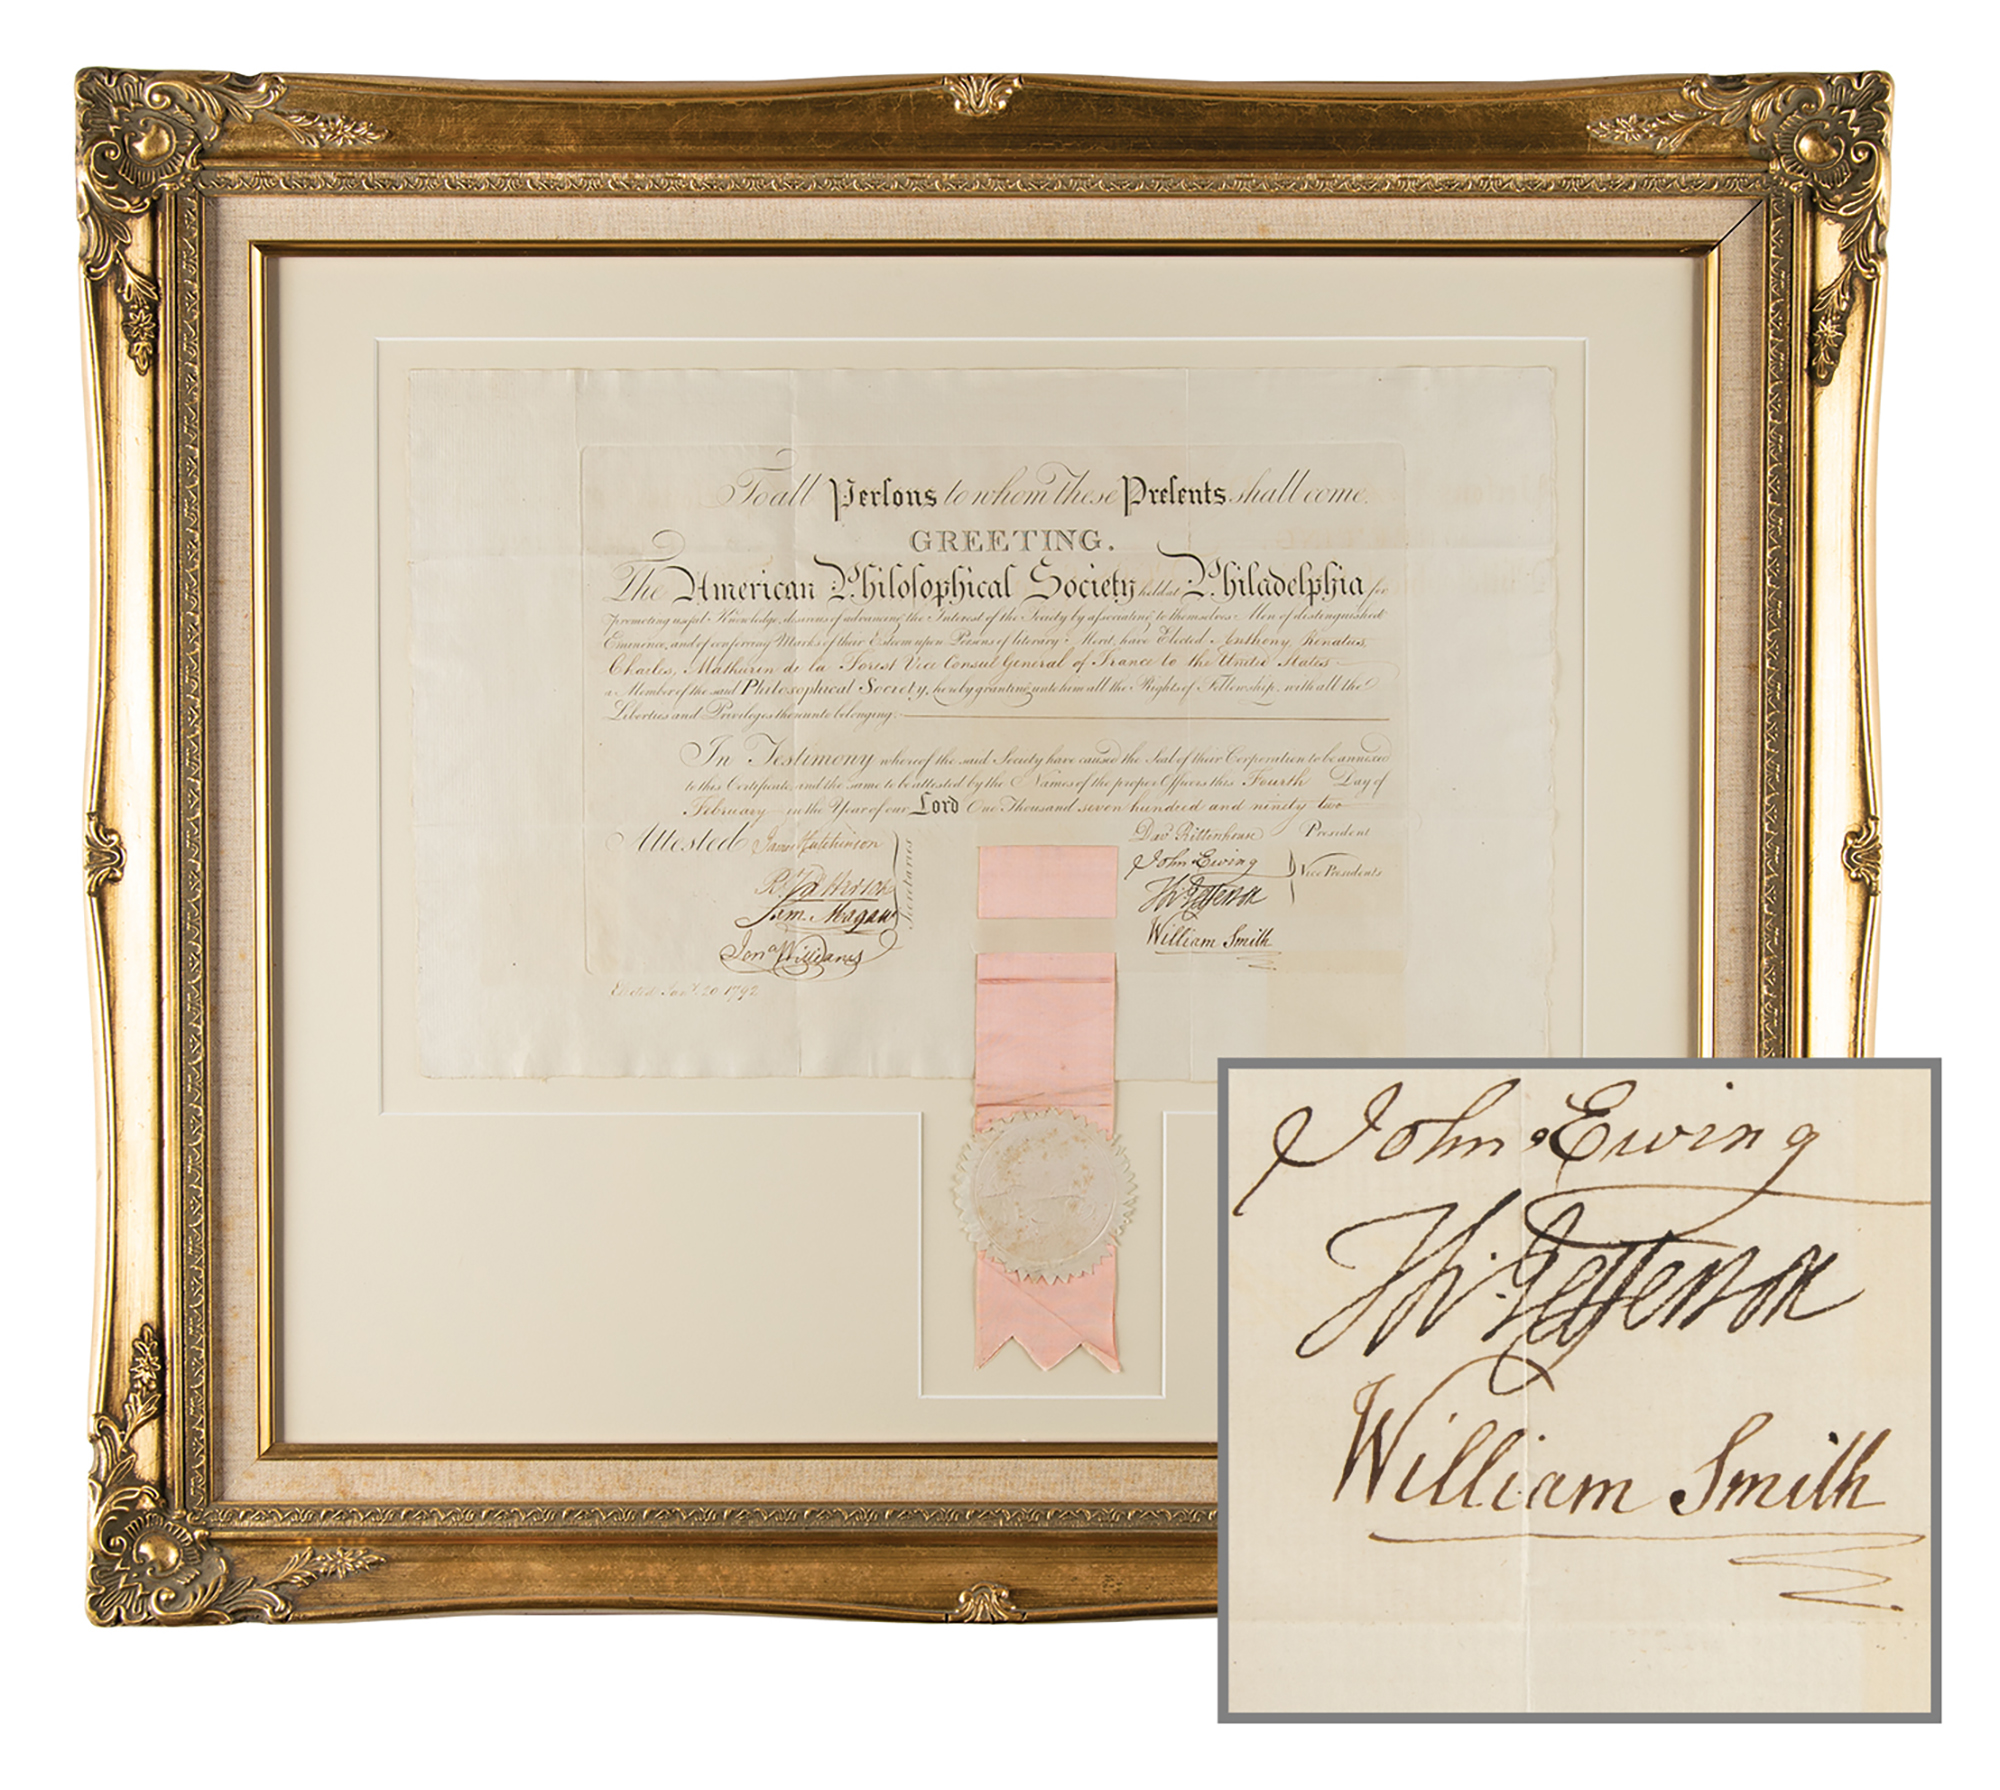 Lot #8 Thomas Jefferson Signed American Philosophical Society Certificate - Image 1